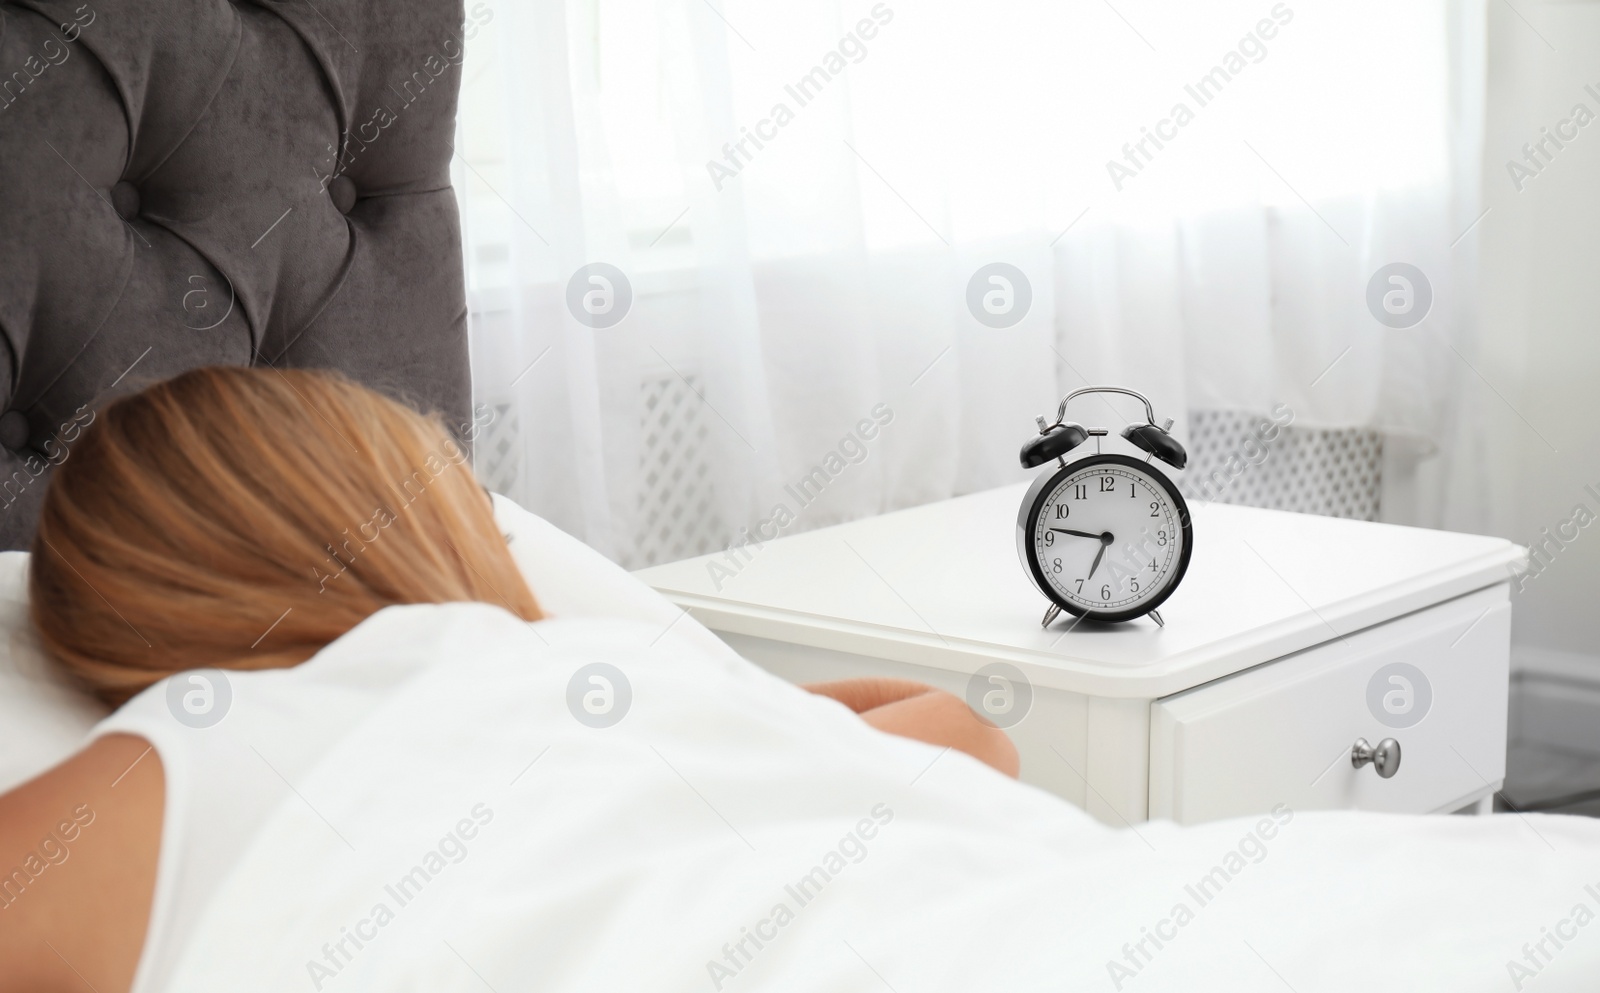 Photo of Analog alarm clock and sleepy woman in bedroom. Time of day